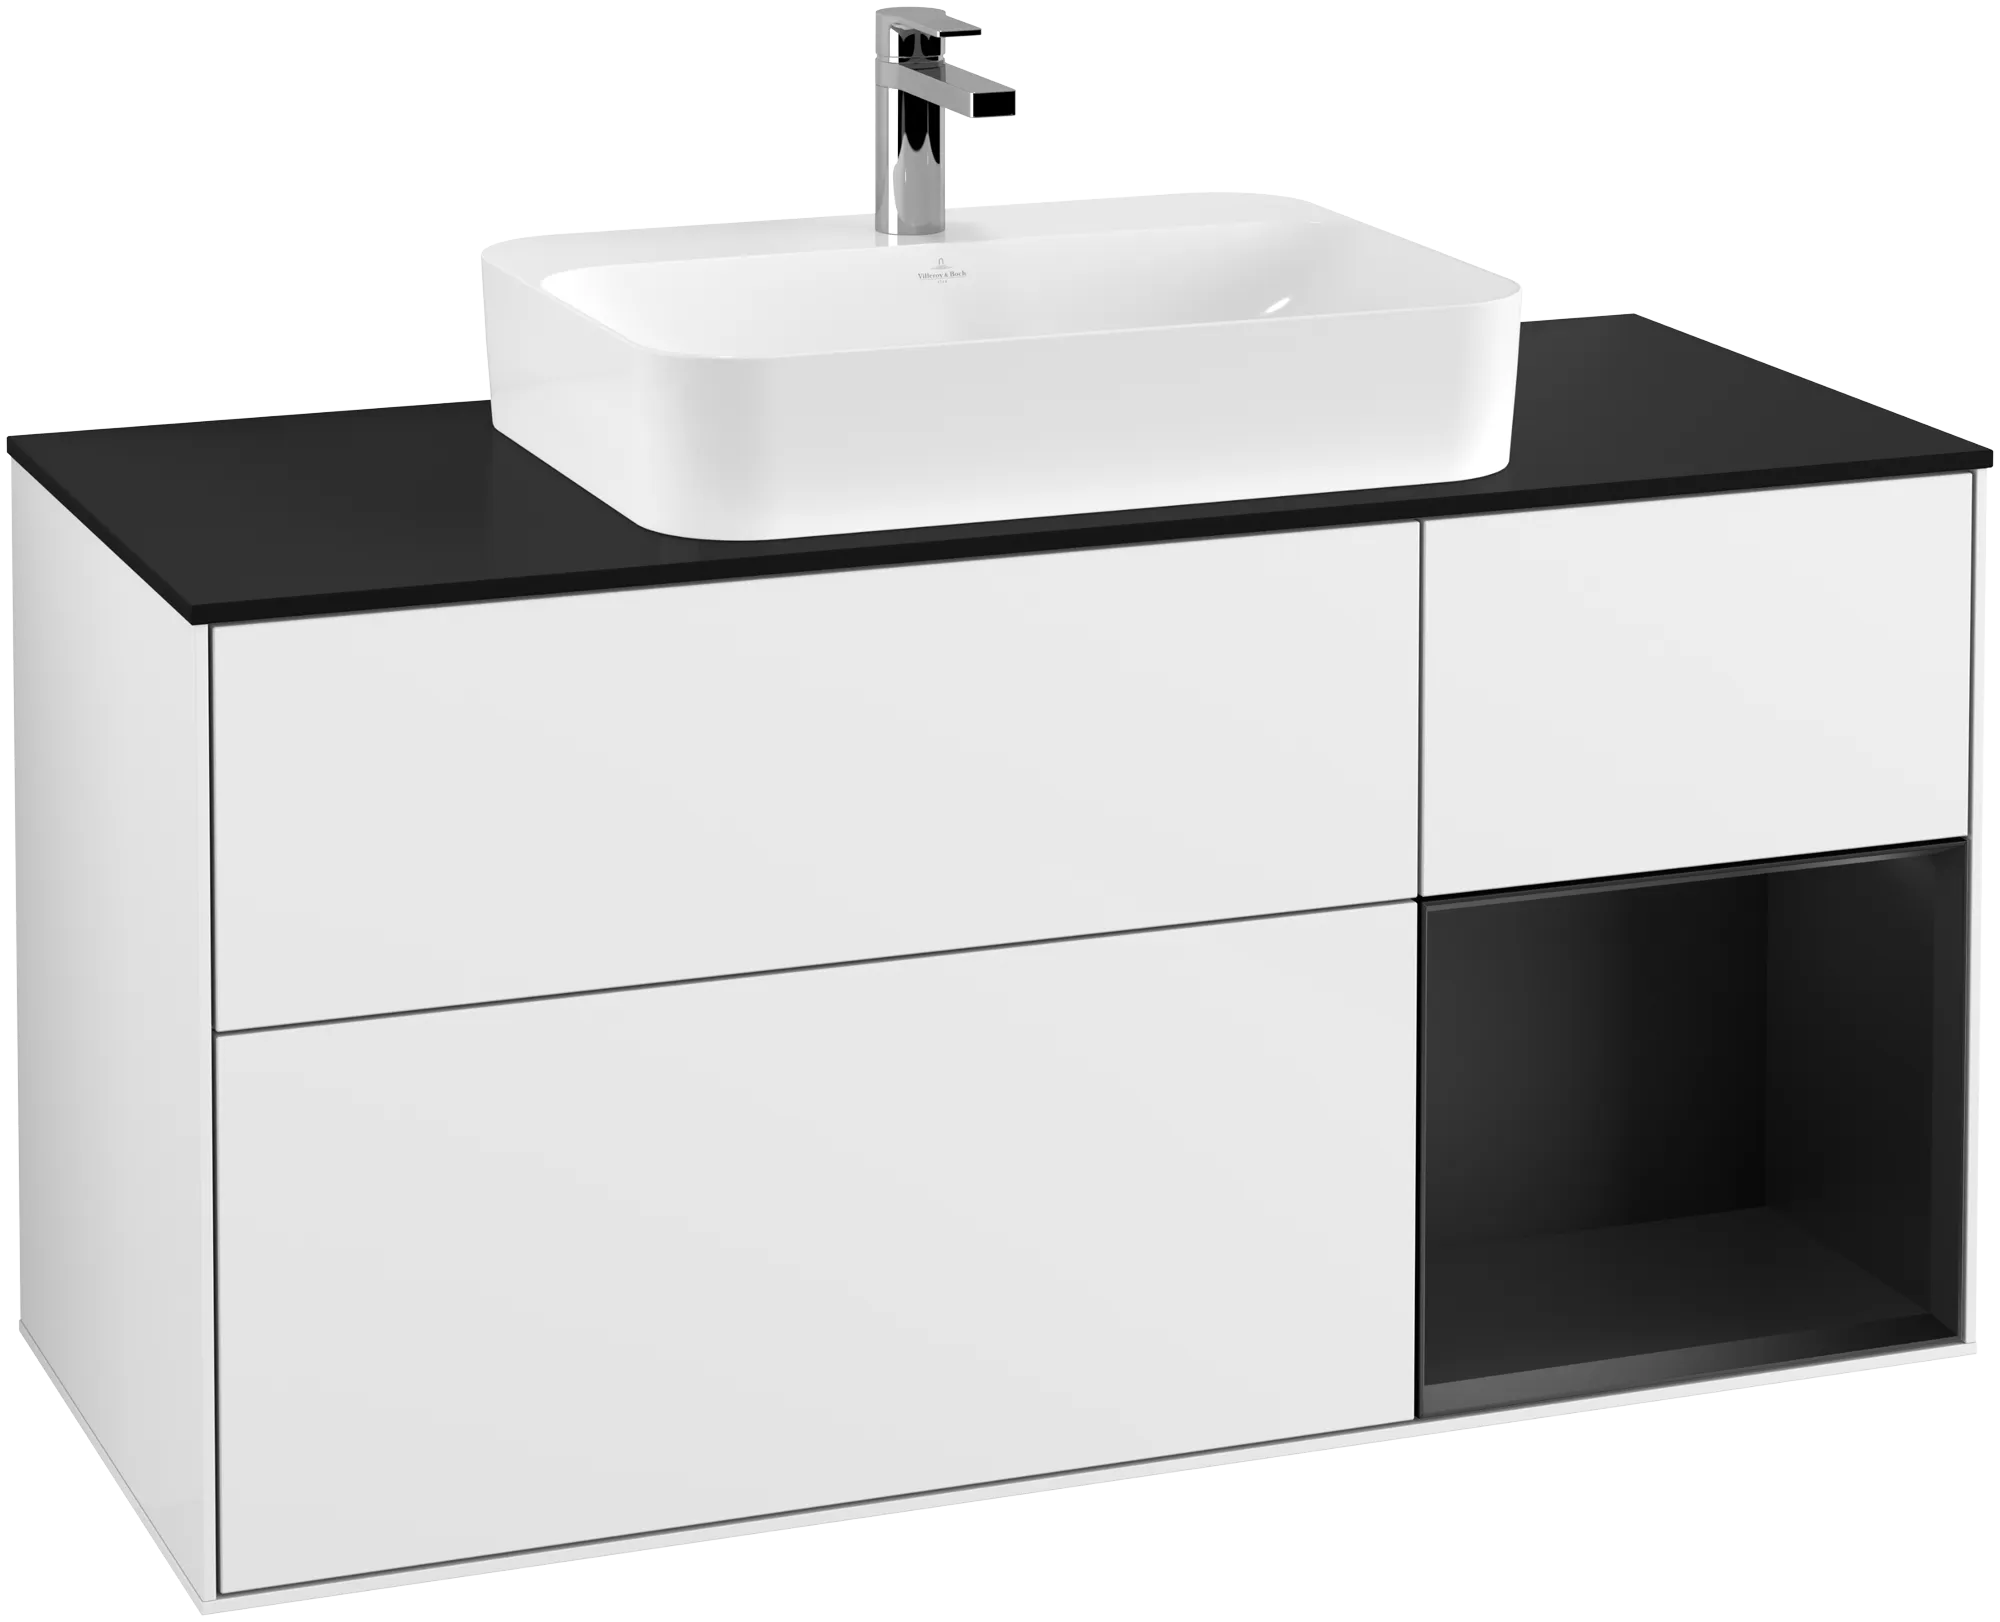 Picture of VILLEROY BOCH Finion Vanity unit, with lighting, 3 pull-out compartments, 1200 x 603 x 501 mm, Glossy White Lacquer / Black Matt Lacquer / Glass Black Matt #G422PDGF